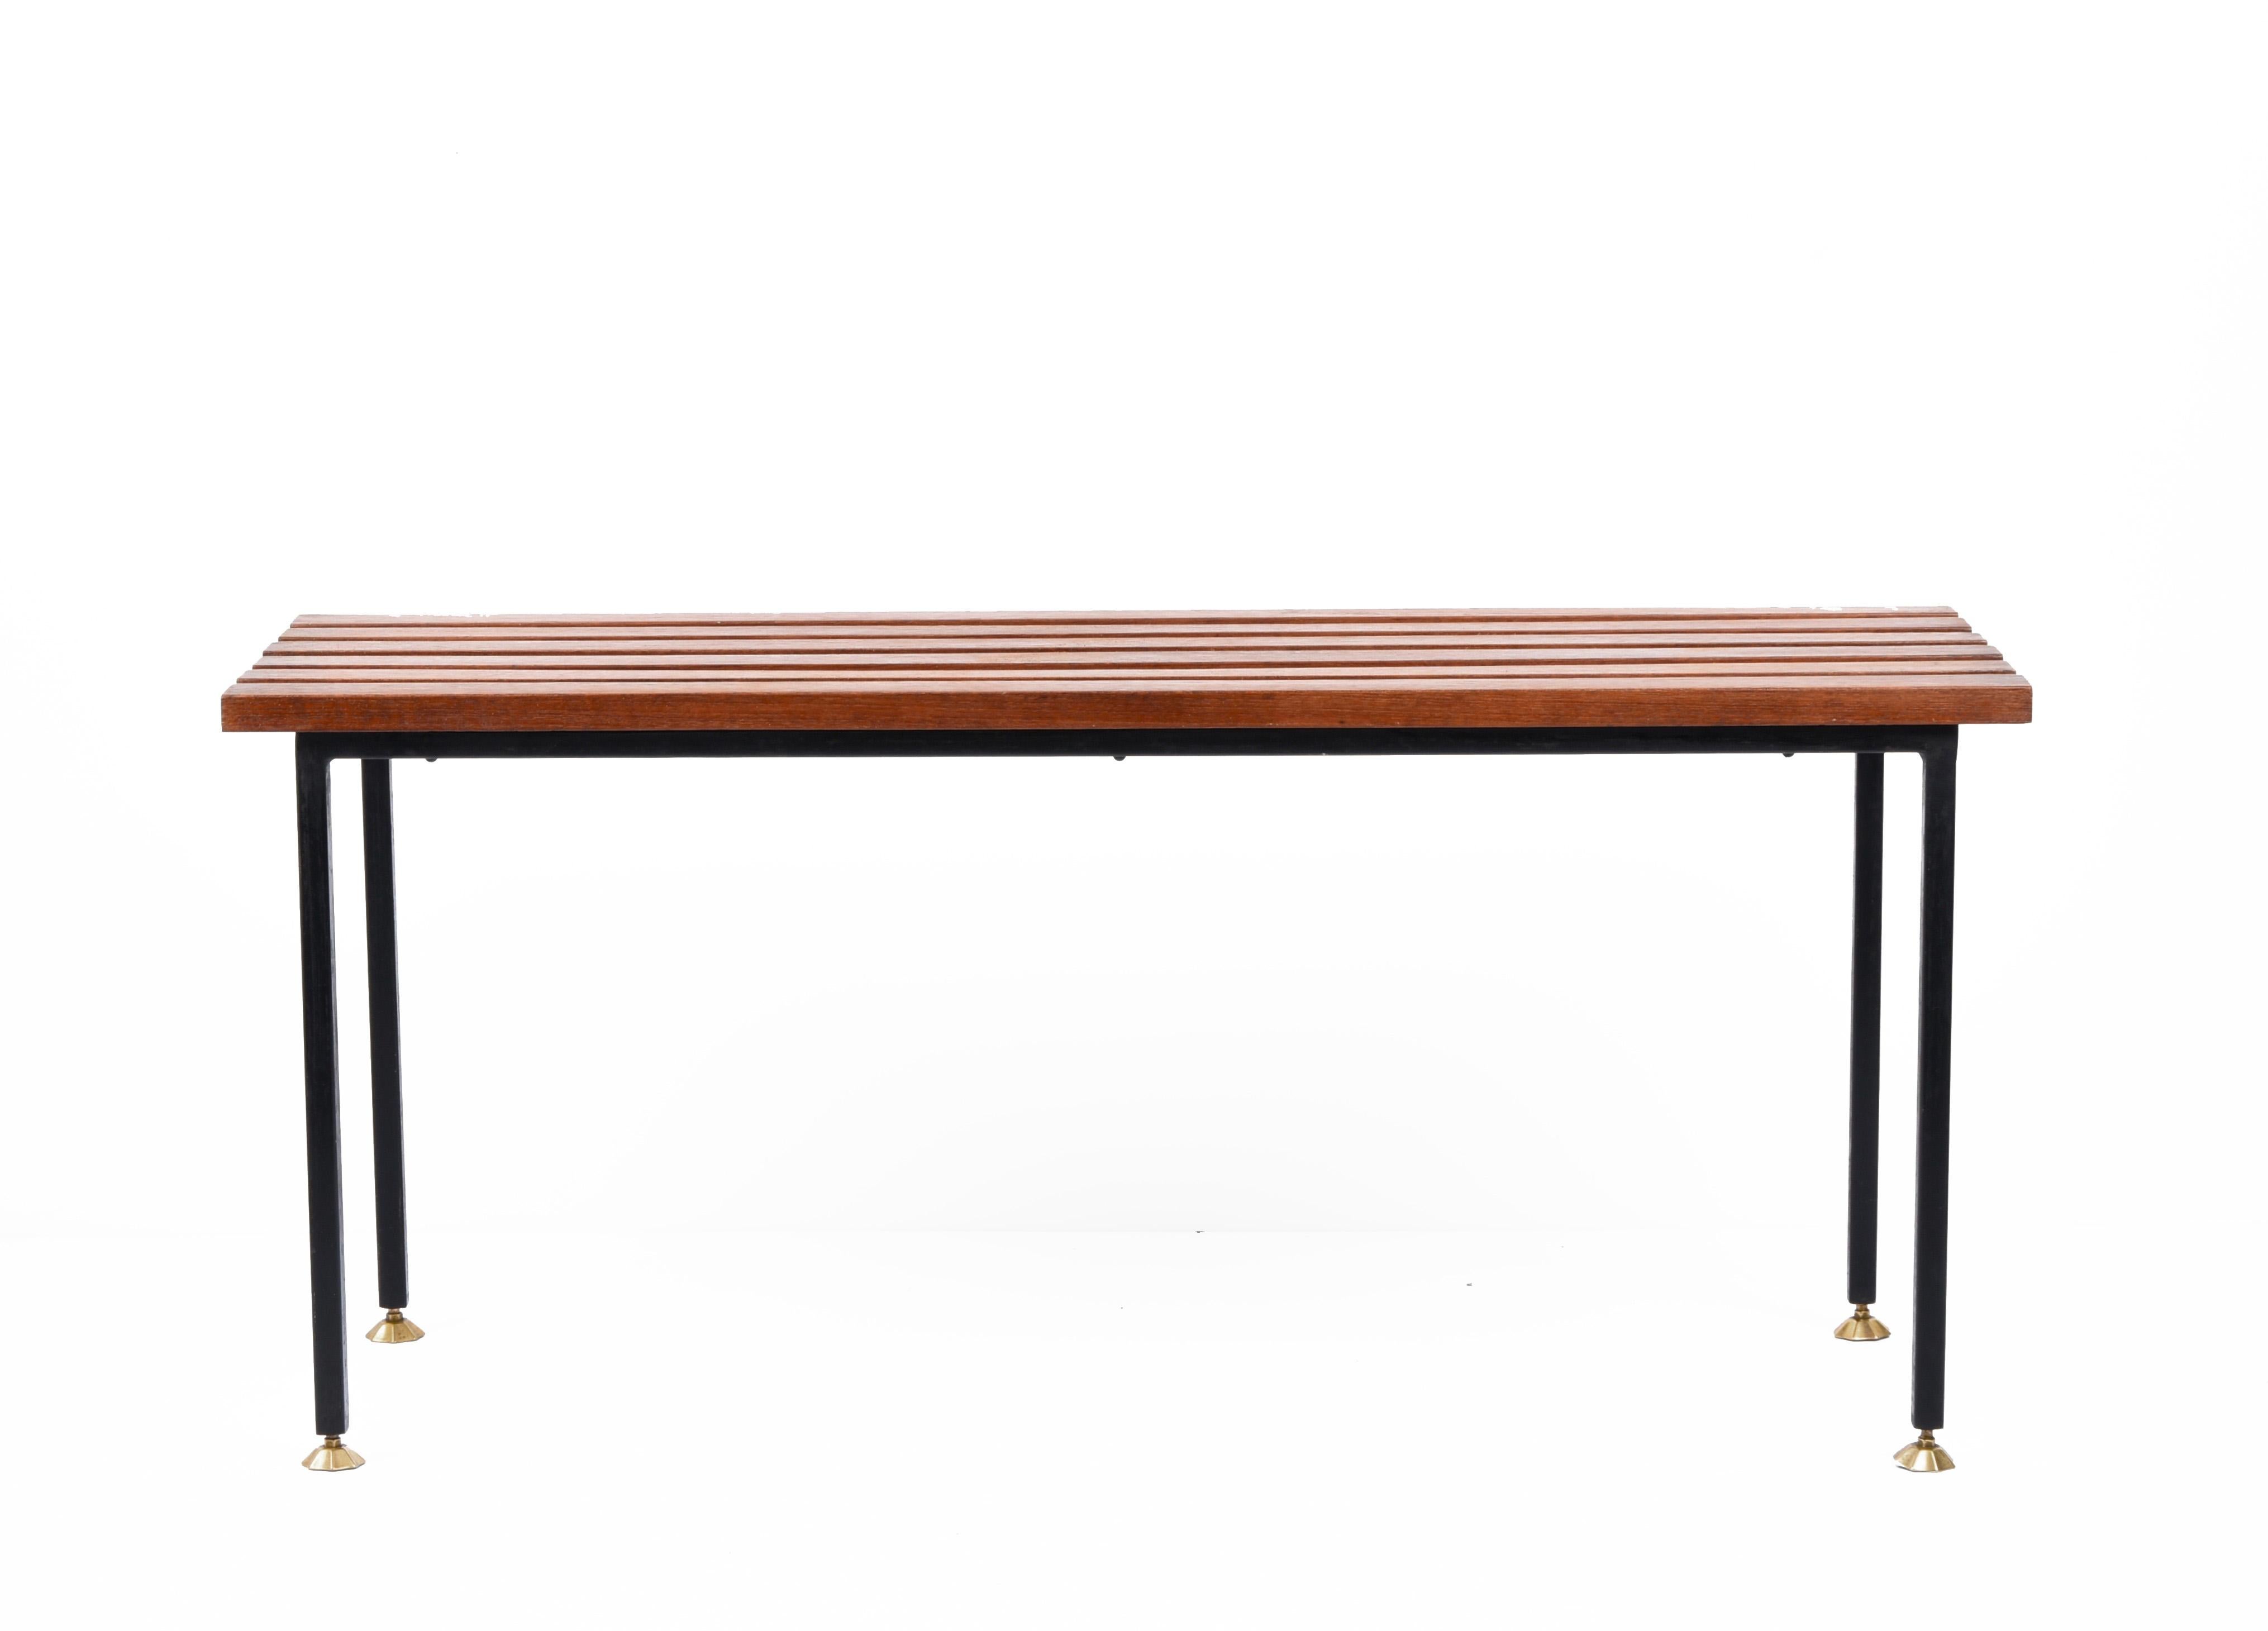 Mid-Century Modern Midcentury Teak and Black Enameled Metal Italian Bench with Brass Feet, 1960s For Sale